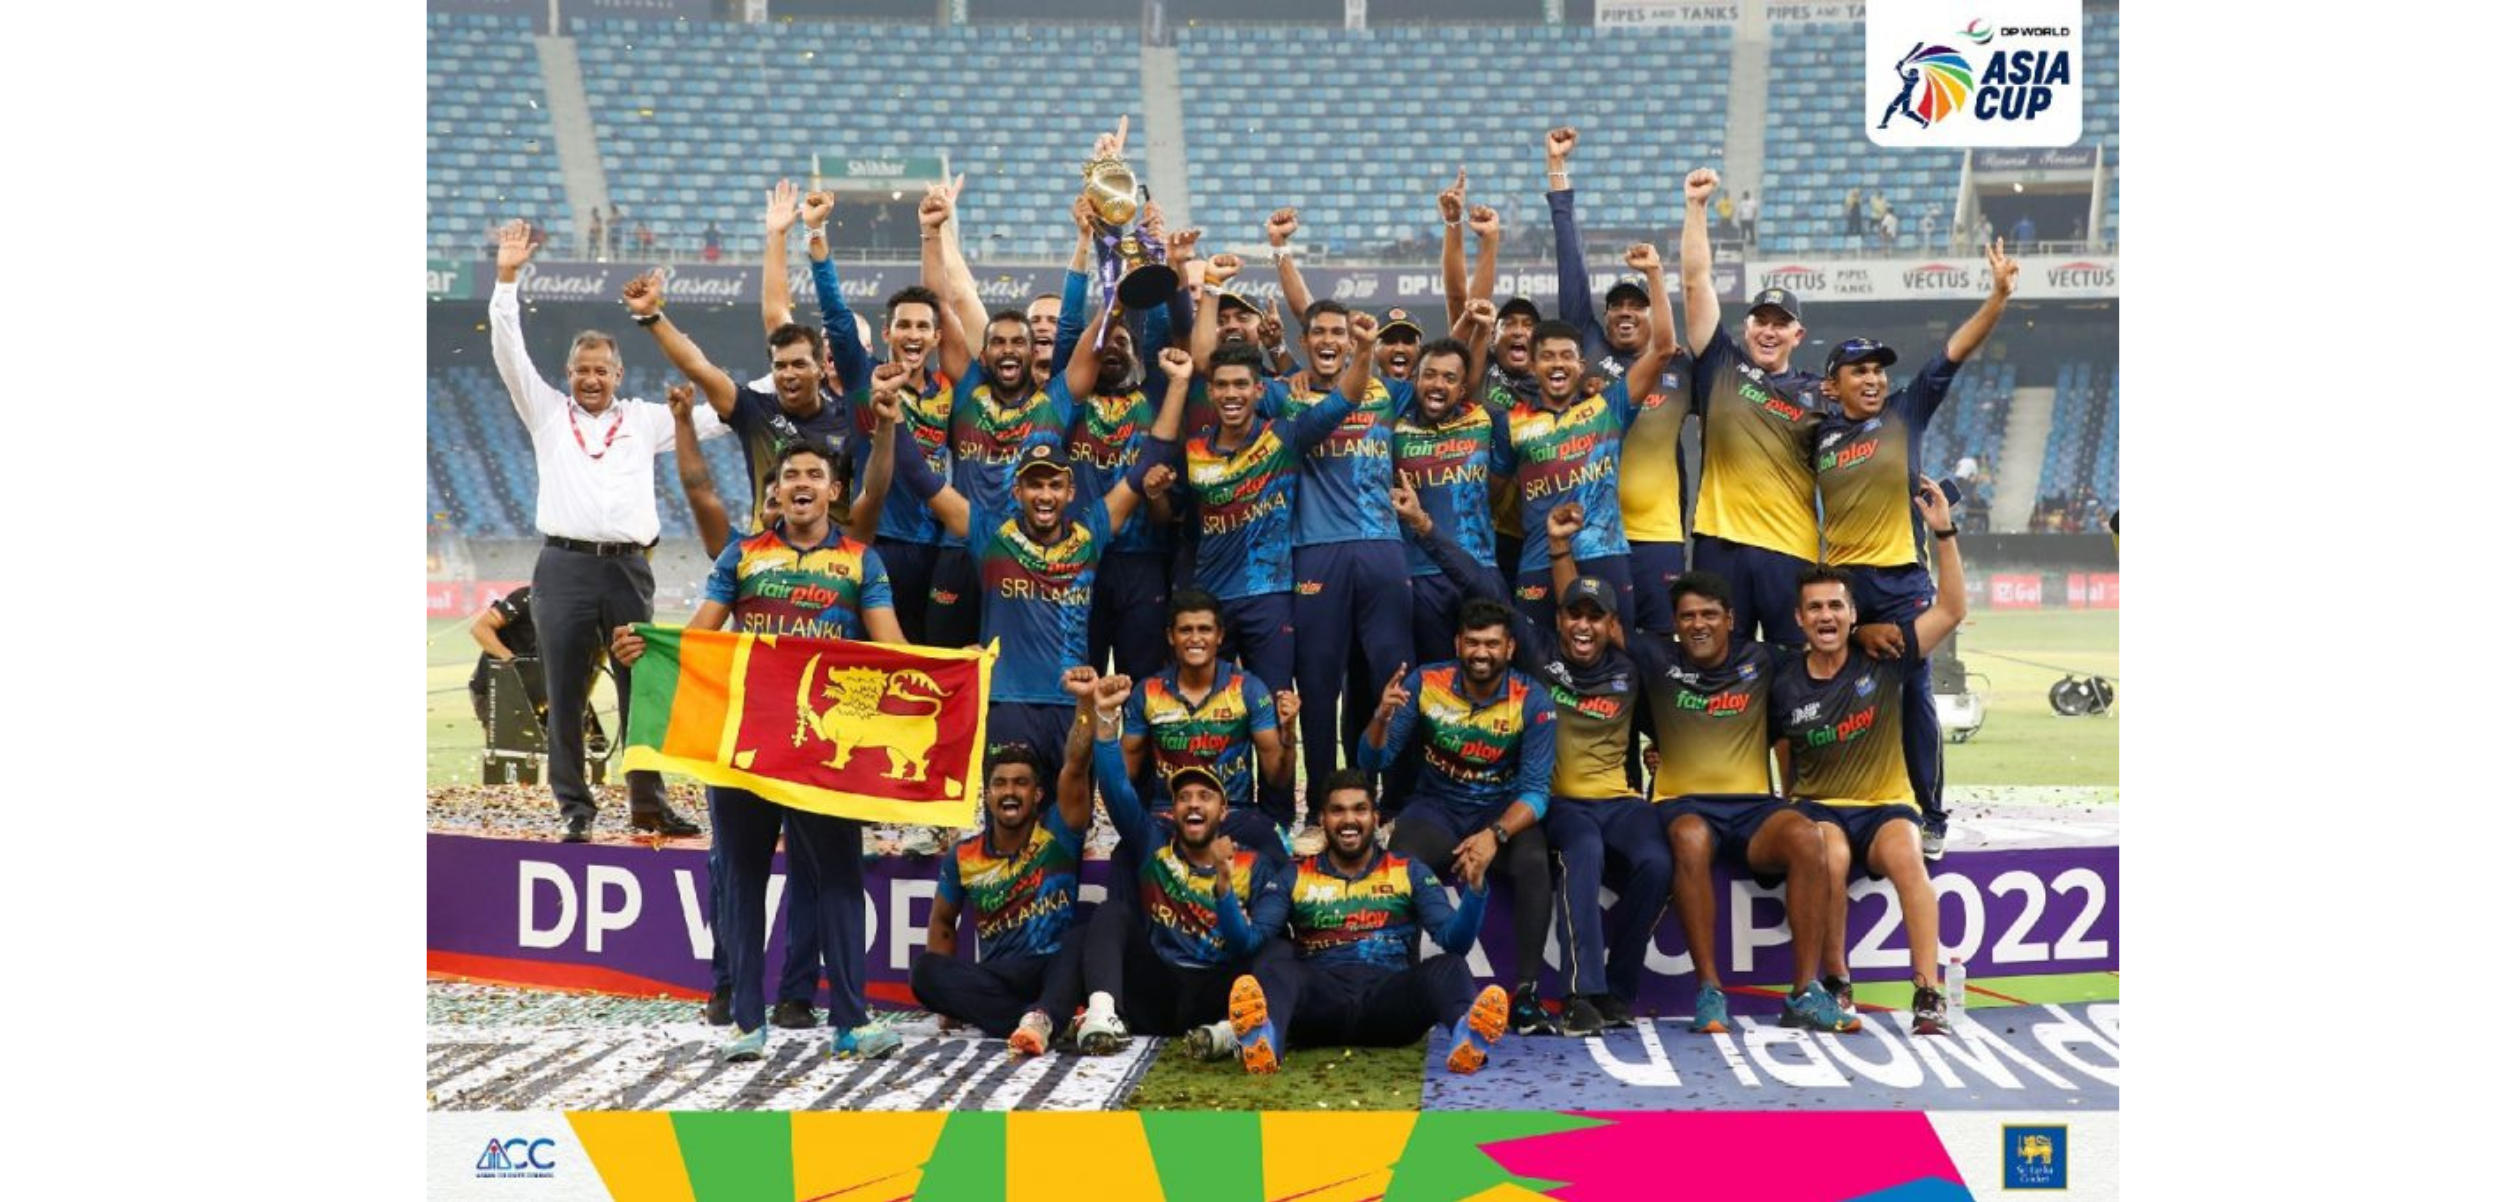 Sri Lanka enter the ICC Men’s T20 World Cup with renewed confidence